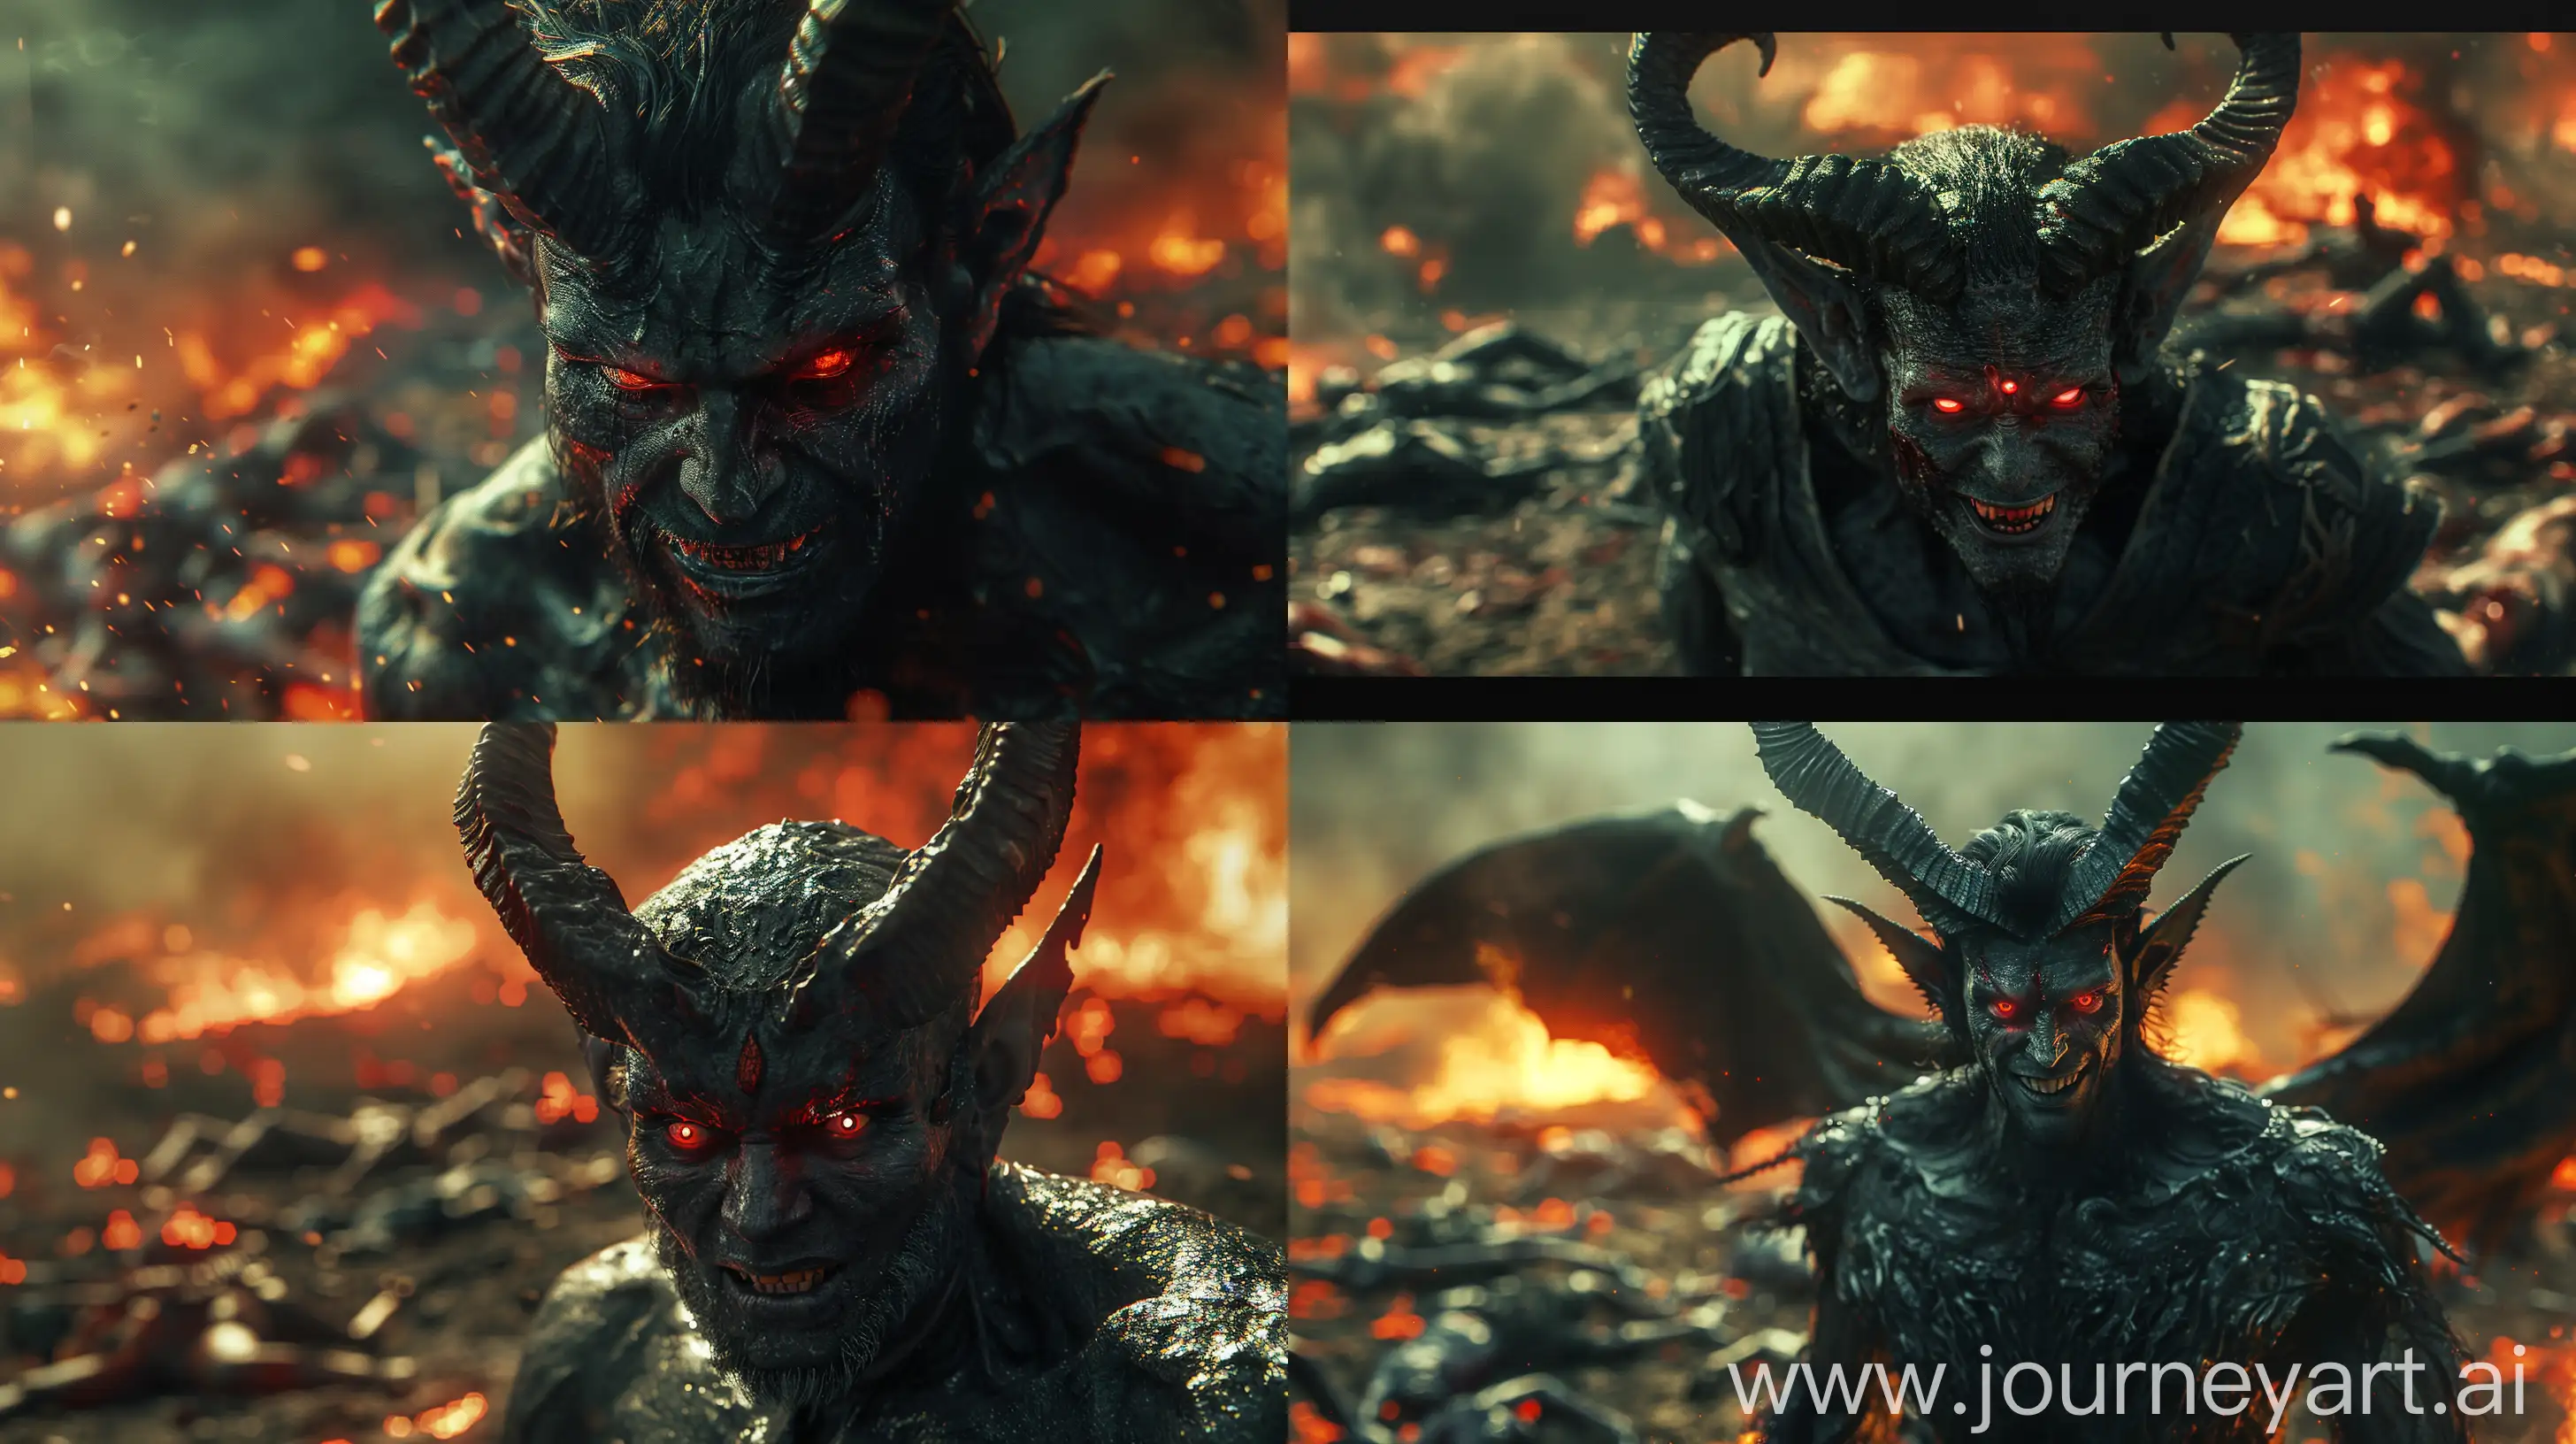 Modern reinterpretation of an Indian demon human like appearance, male in his thirties with red eyes and horns, close-up view showcasing an evil smile and widened eyes, amidst wartorn scenery with bodies lying around, smoky fiery background enveloping the scene, very close to camera angle, high level of intricate details for a vivid high resolution depiction --s 400 --sref https://i.postimg.cc/nz3jywV2/IMG-20240414-120352.png --ar 16:9 --v 6